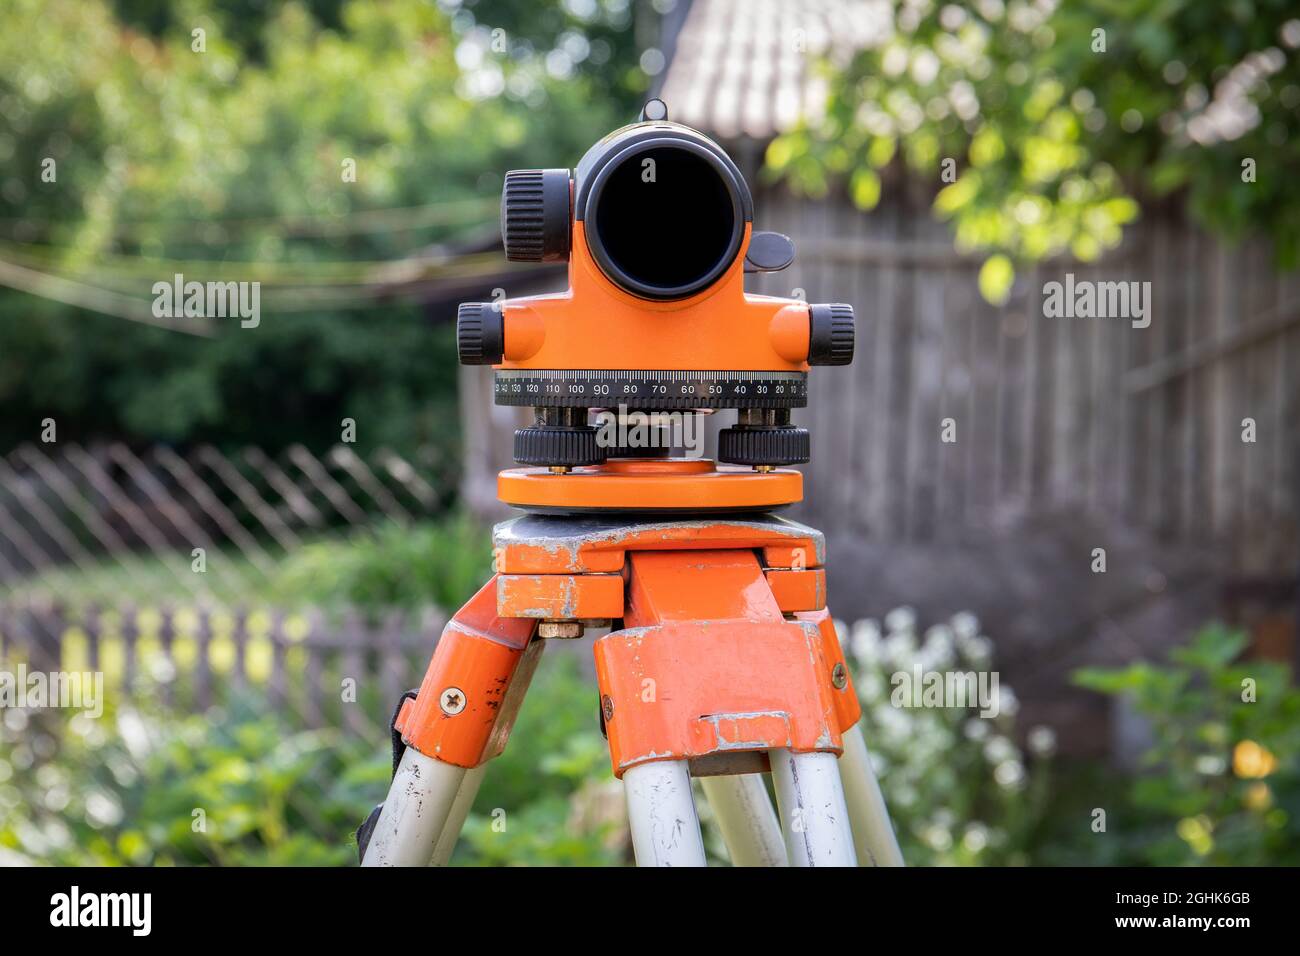 Automatic Level High Resolution Stock Photography and Images - Alamy